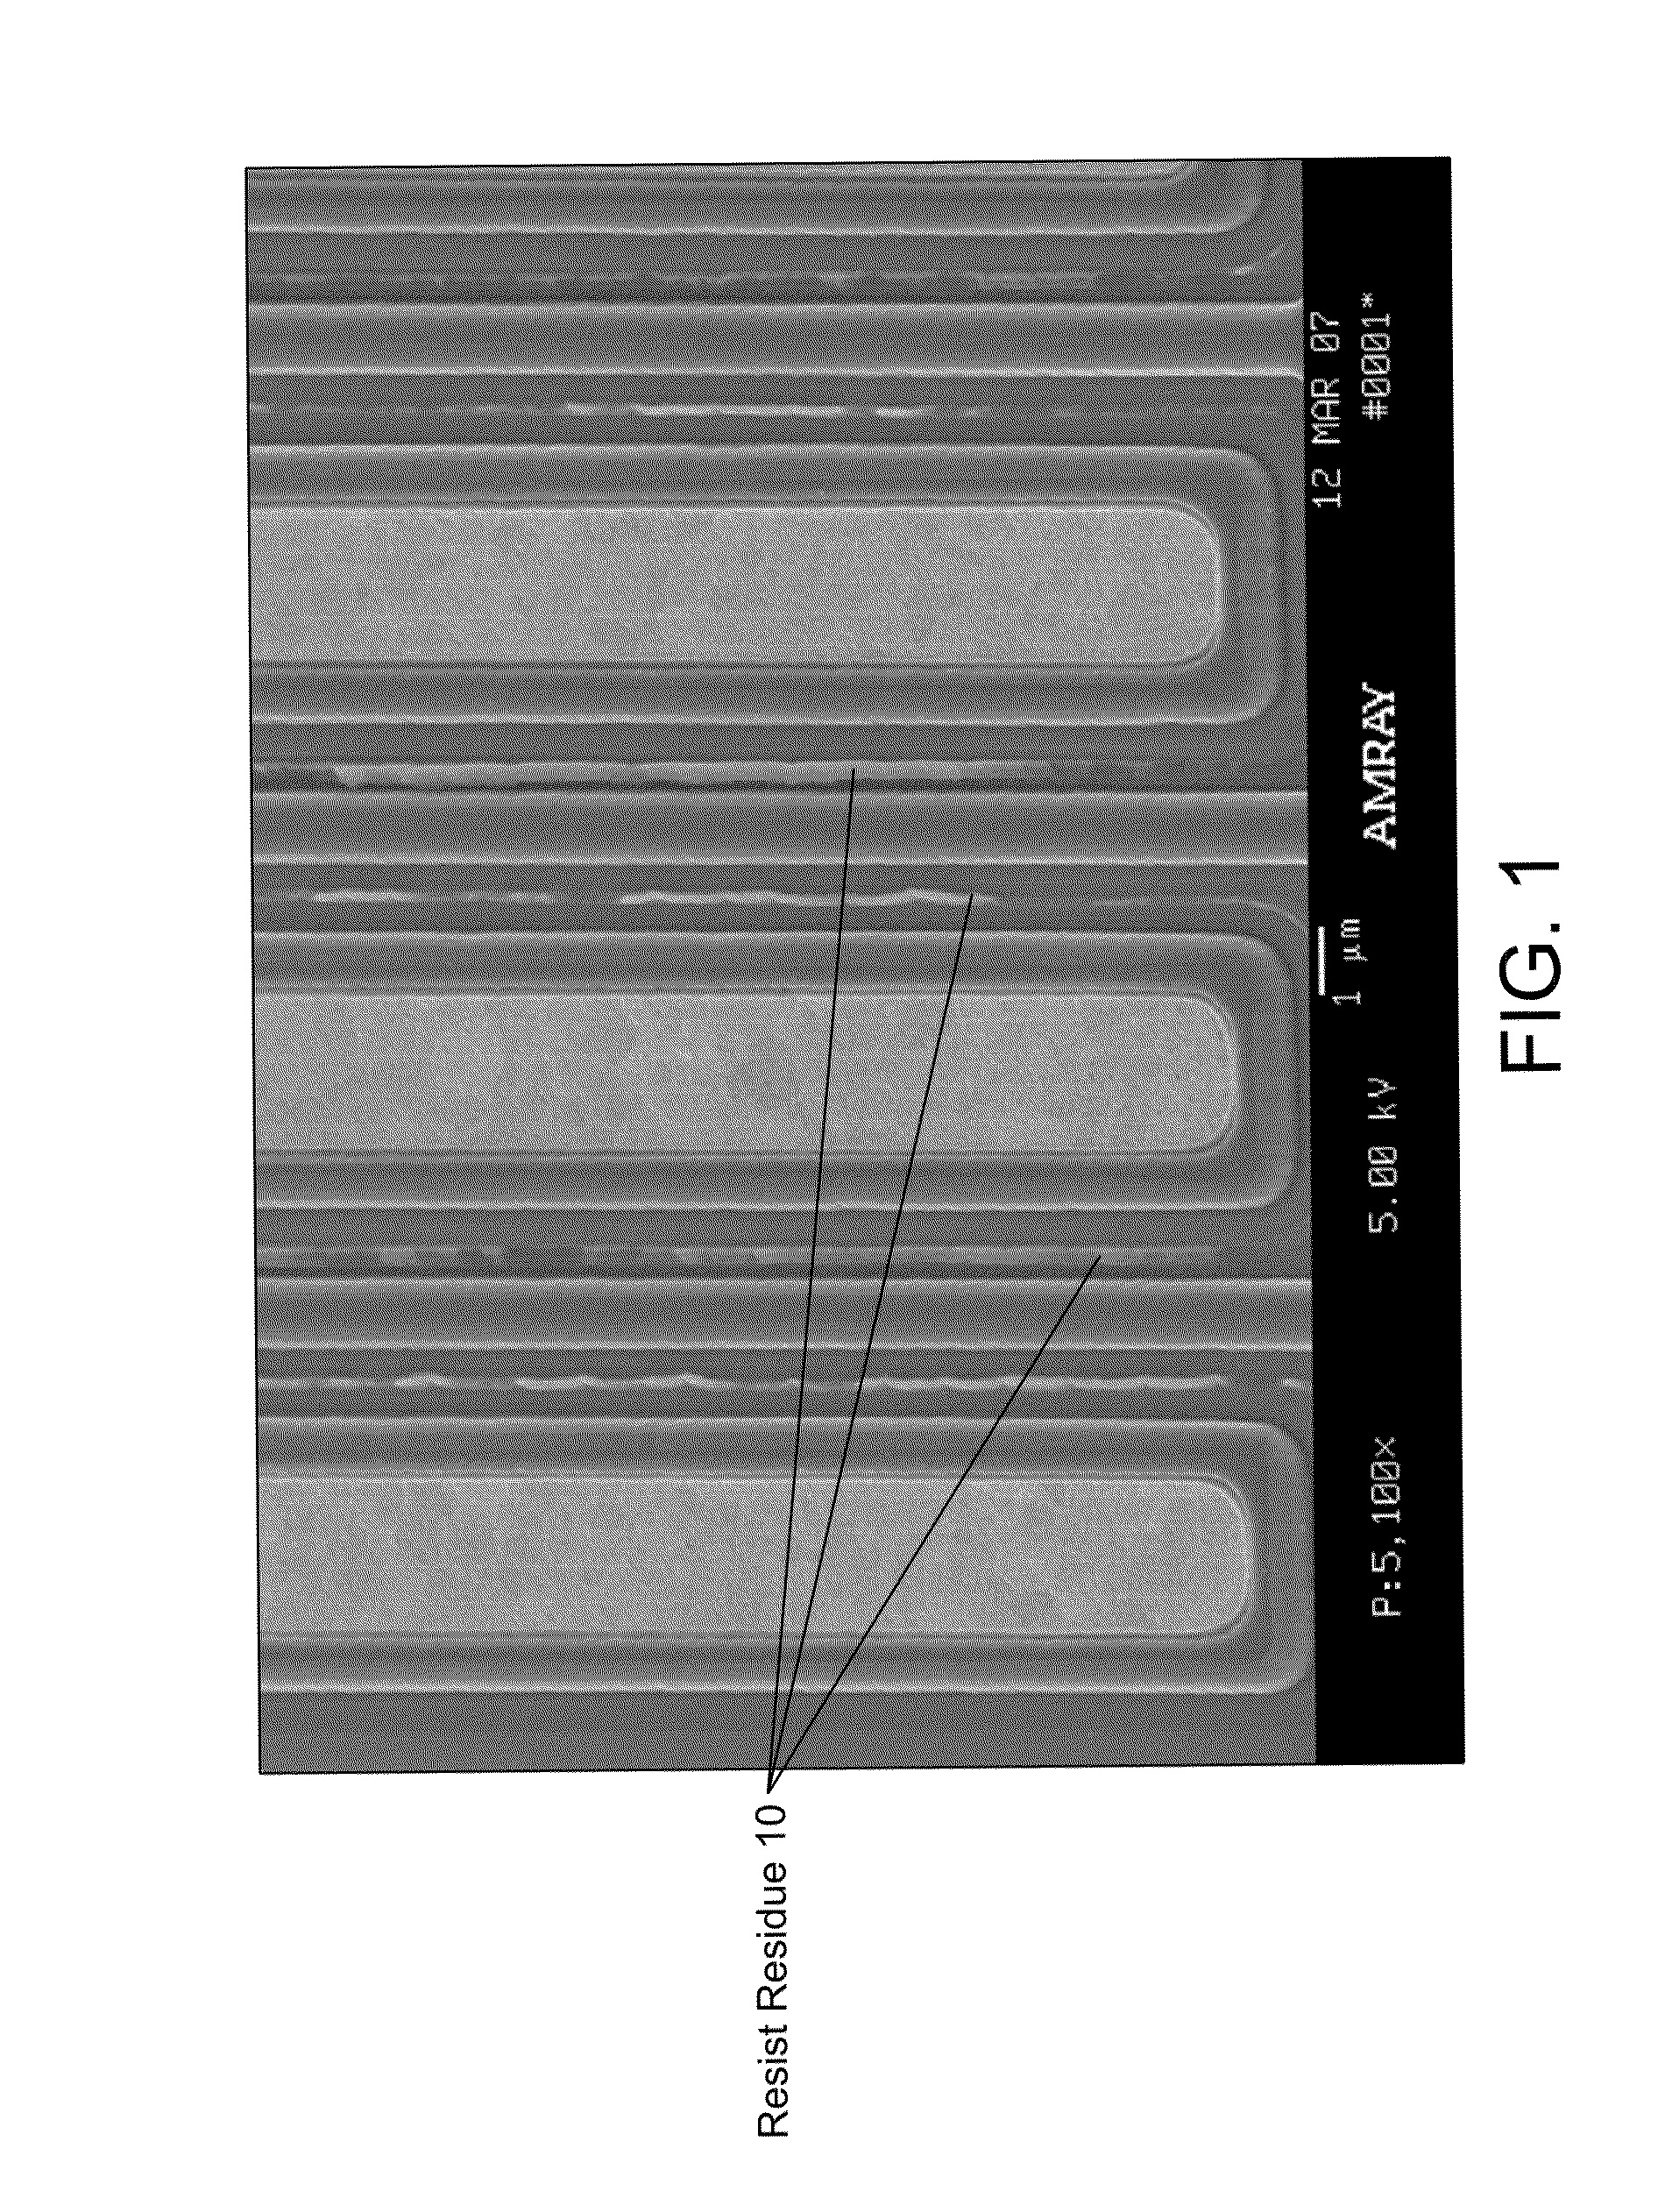 Electron radiation monitoring system to prevent gold spitting and resist cross-linking during evaporation